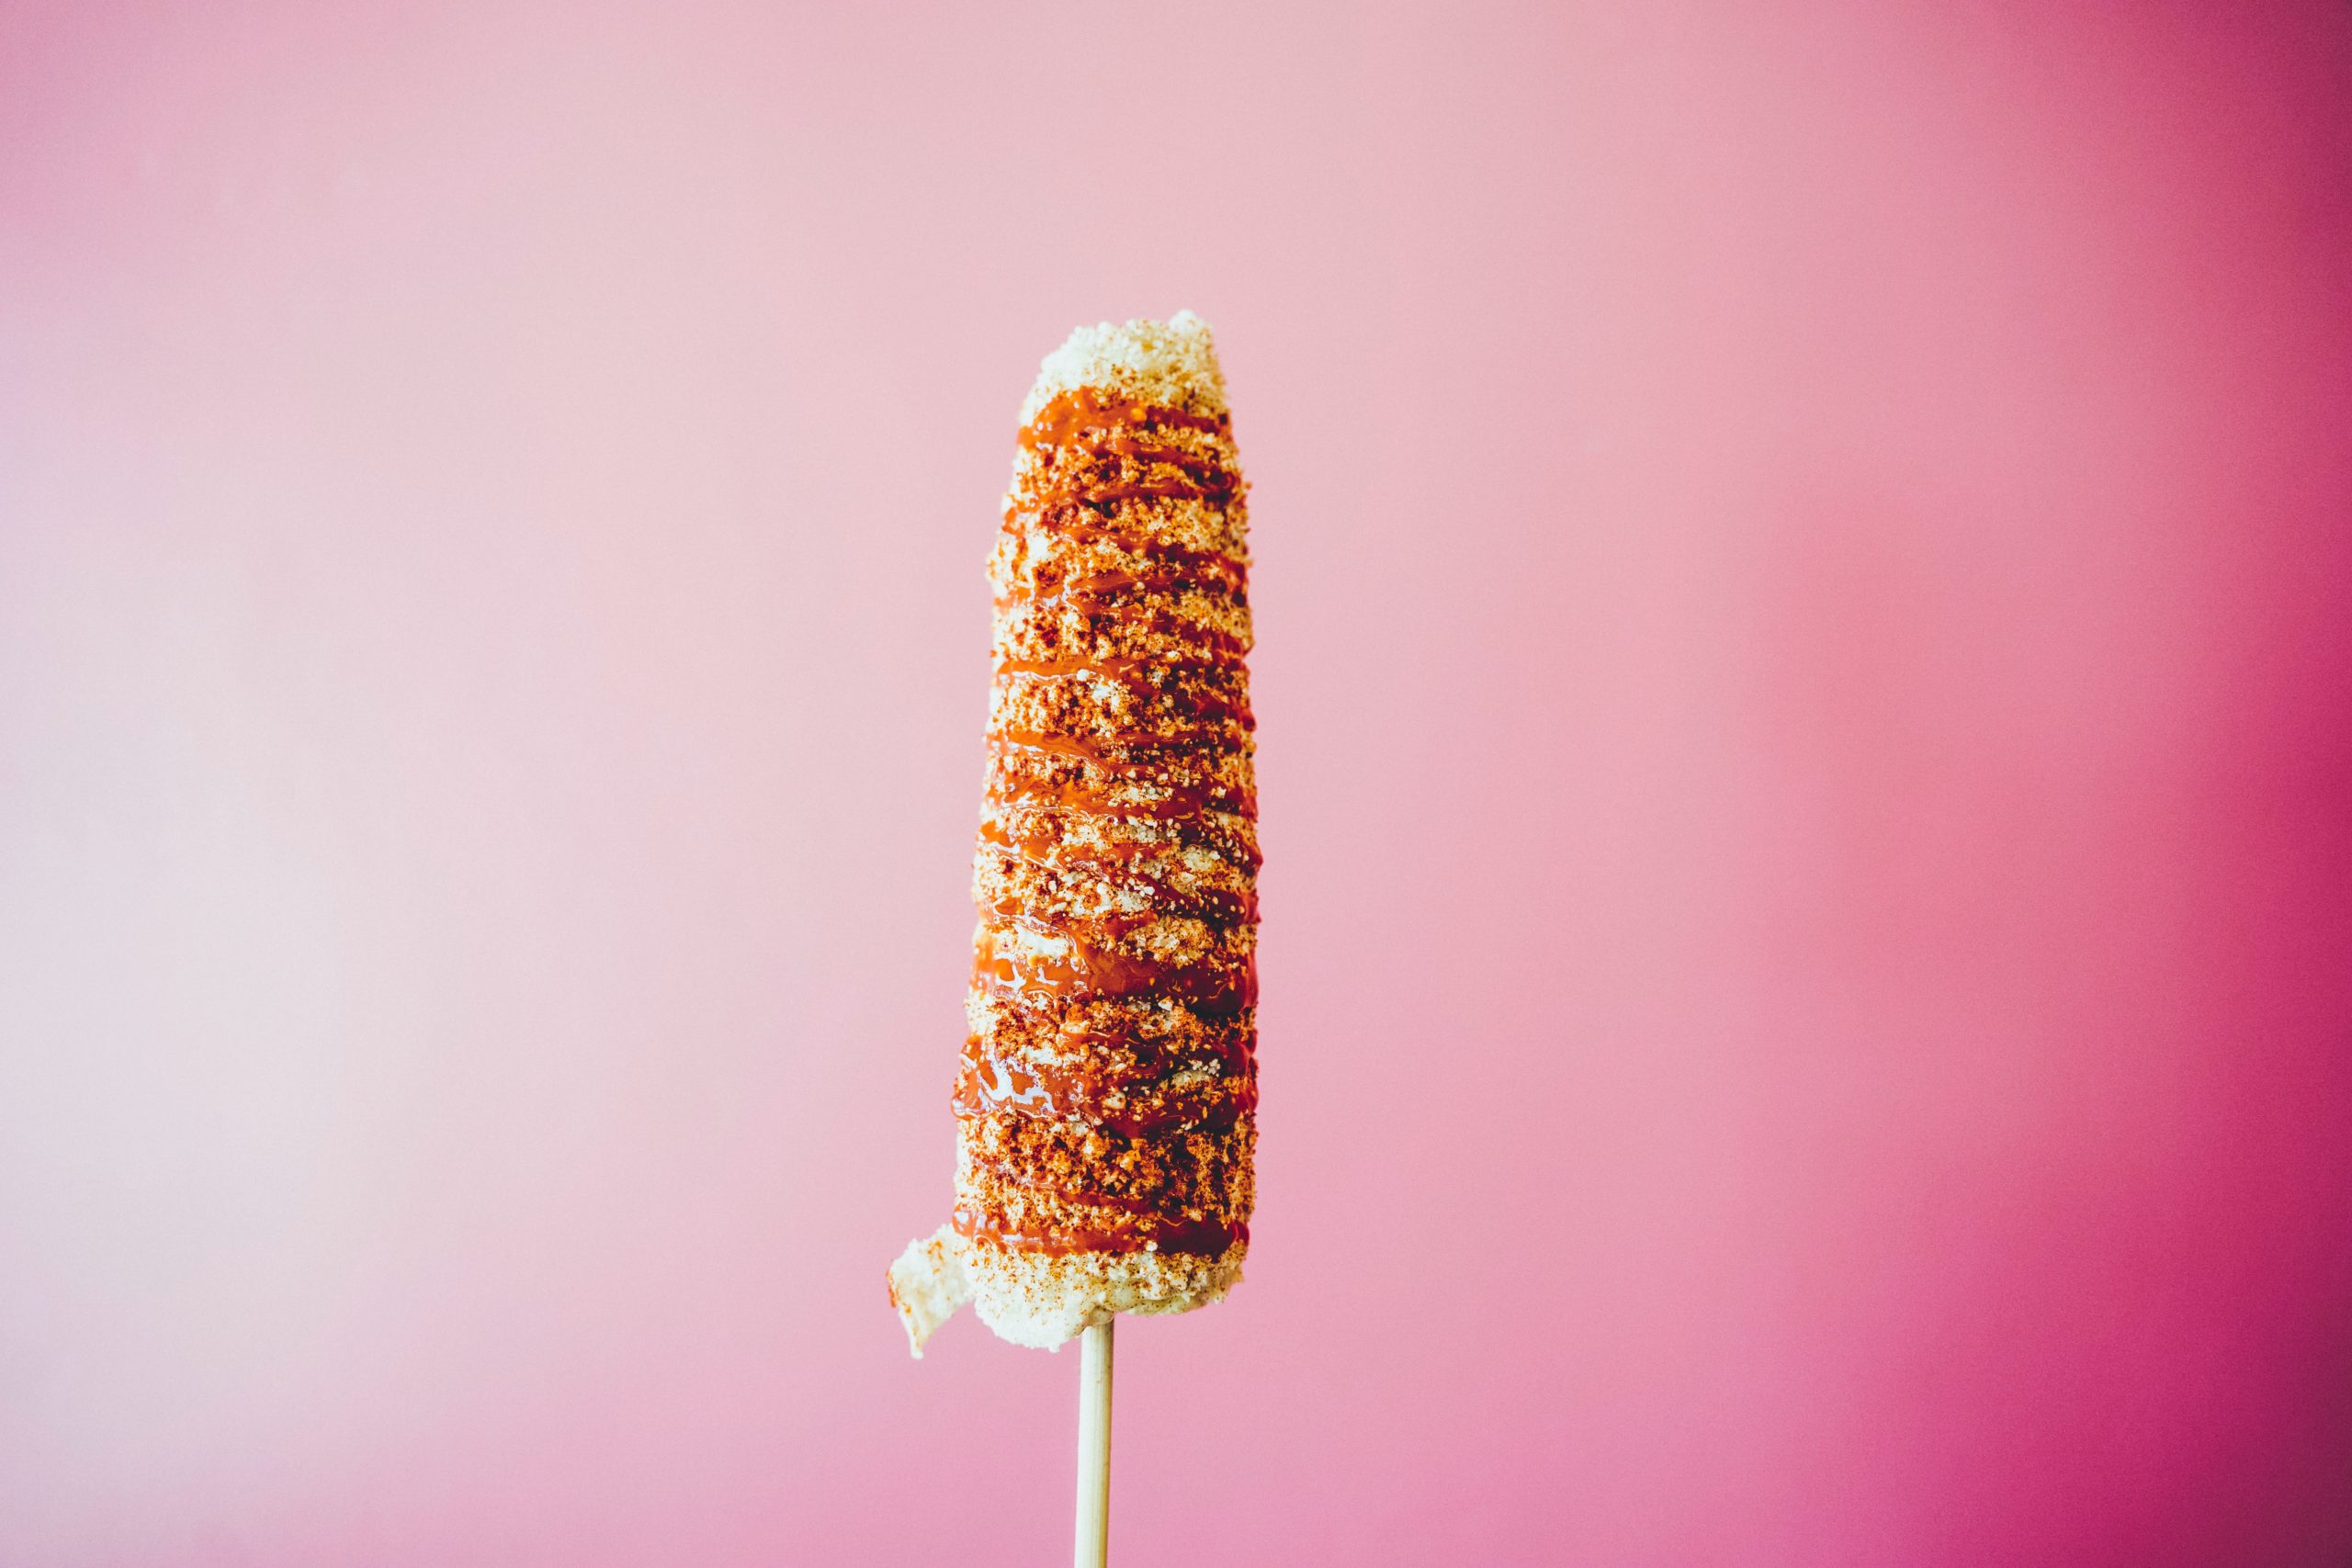 A elote over a pink background. Picture by Diego Lozano on Unsplash